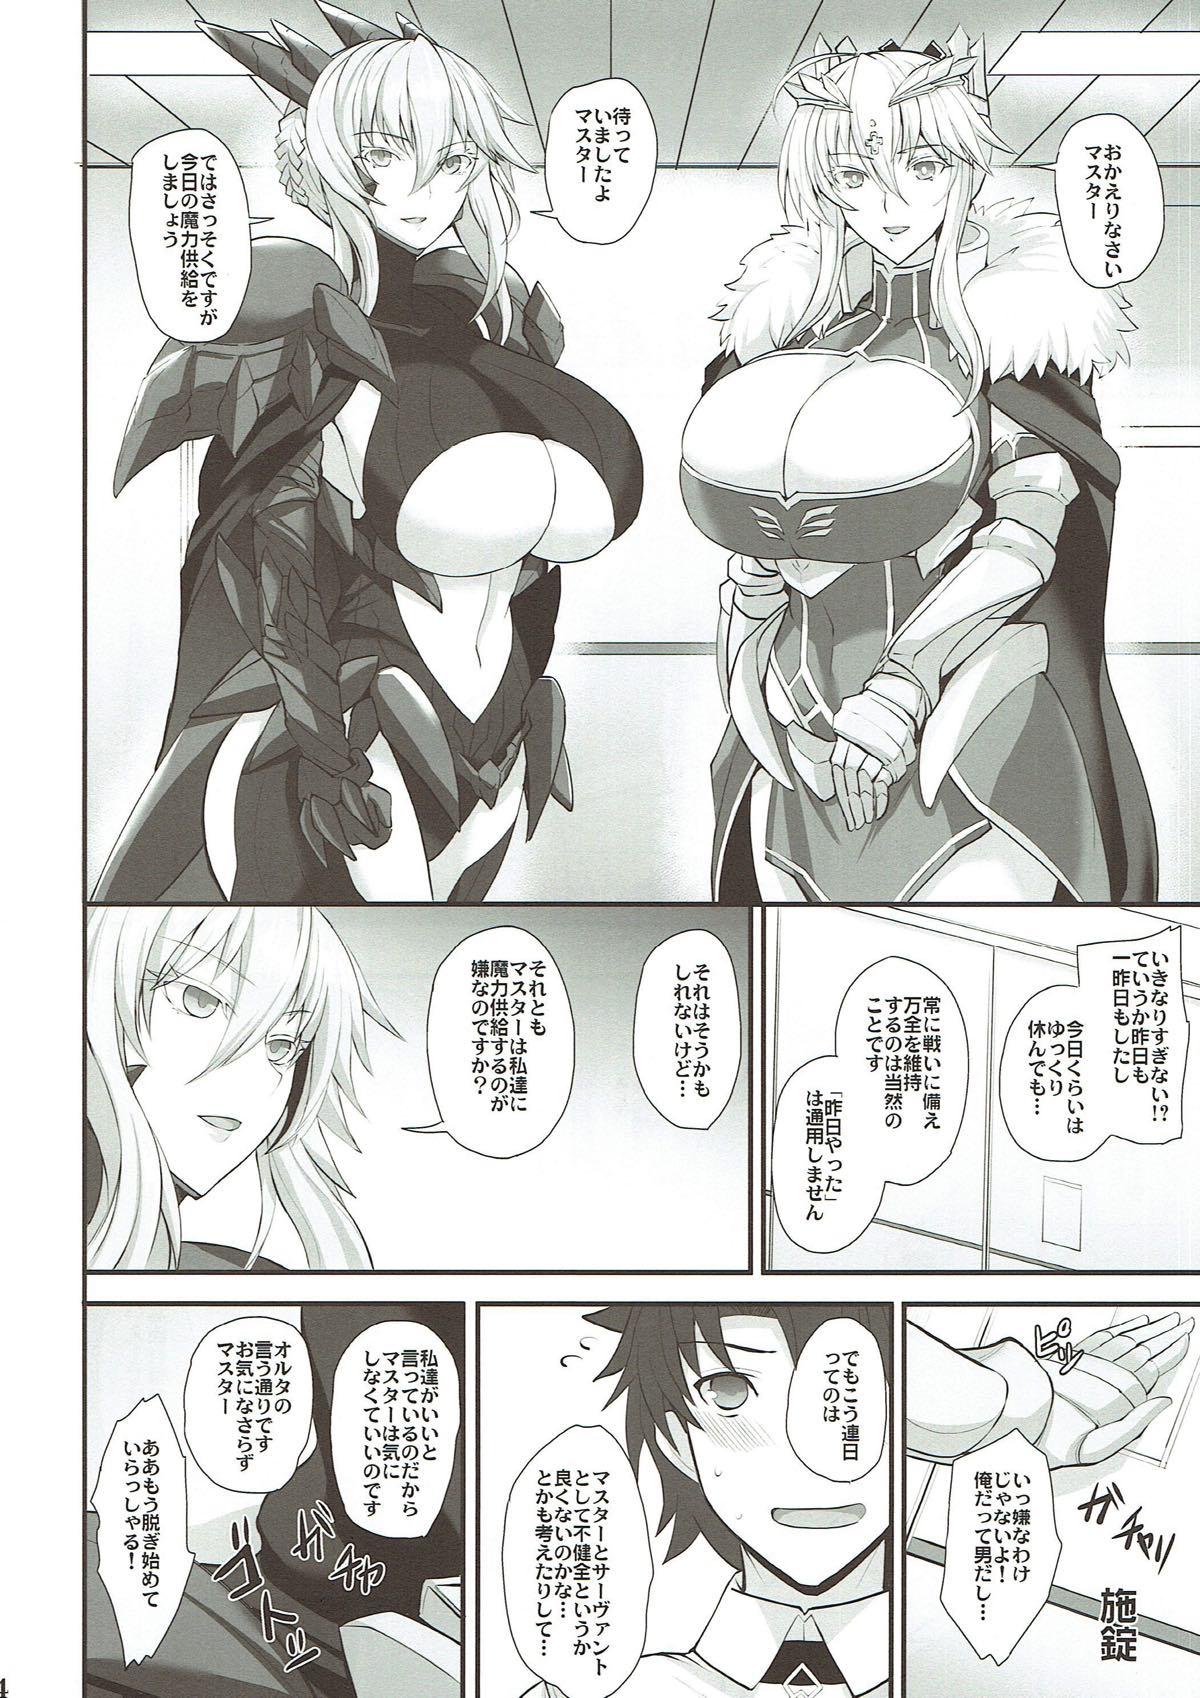 Milk Chichiue to Issho - Fate grand order Storyline - Page 4